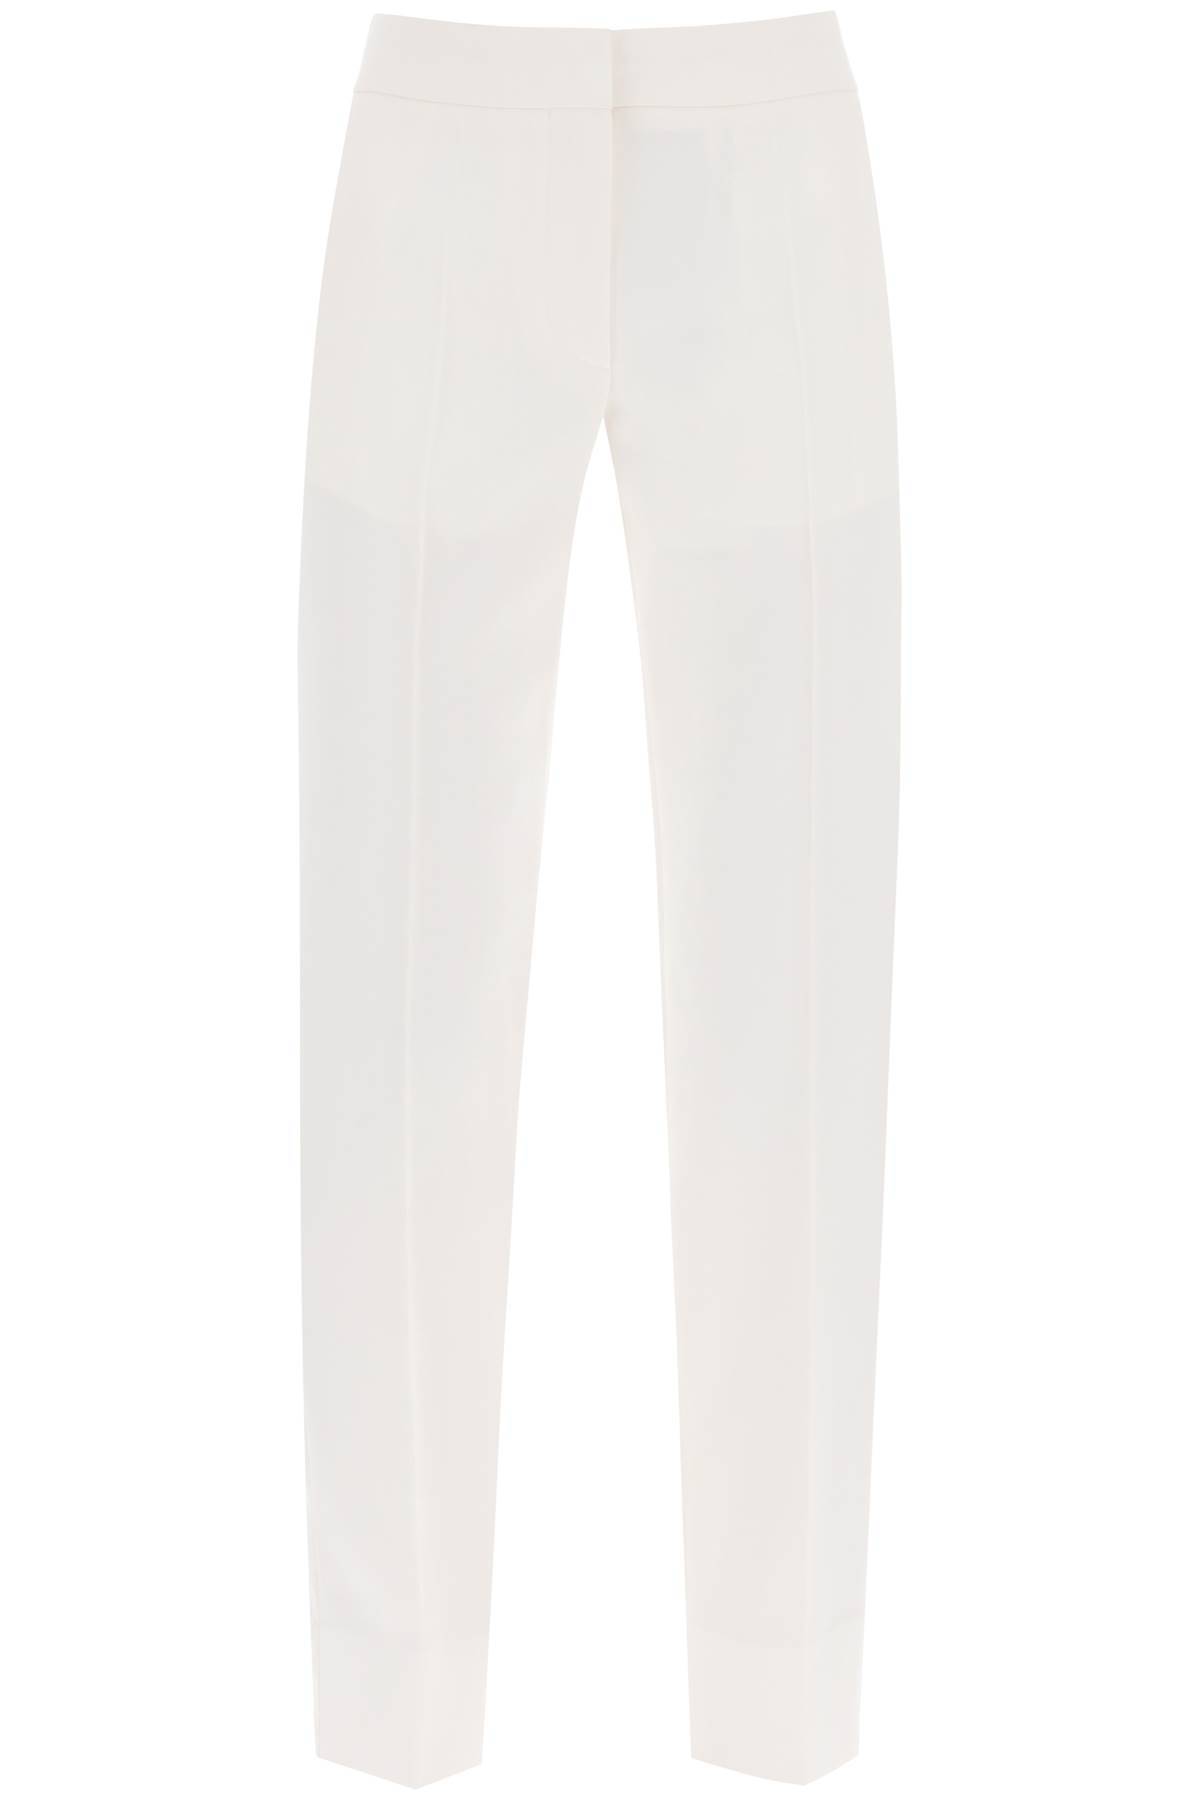 Givenchy Tailored Trousers With Satin Bands In White